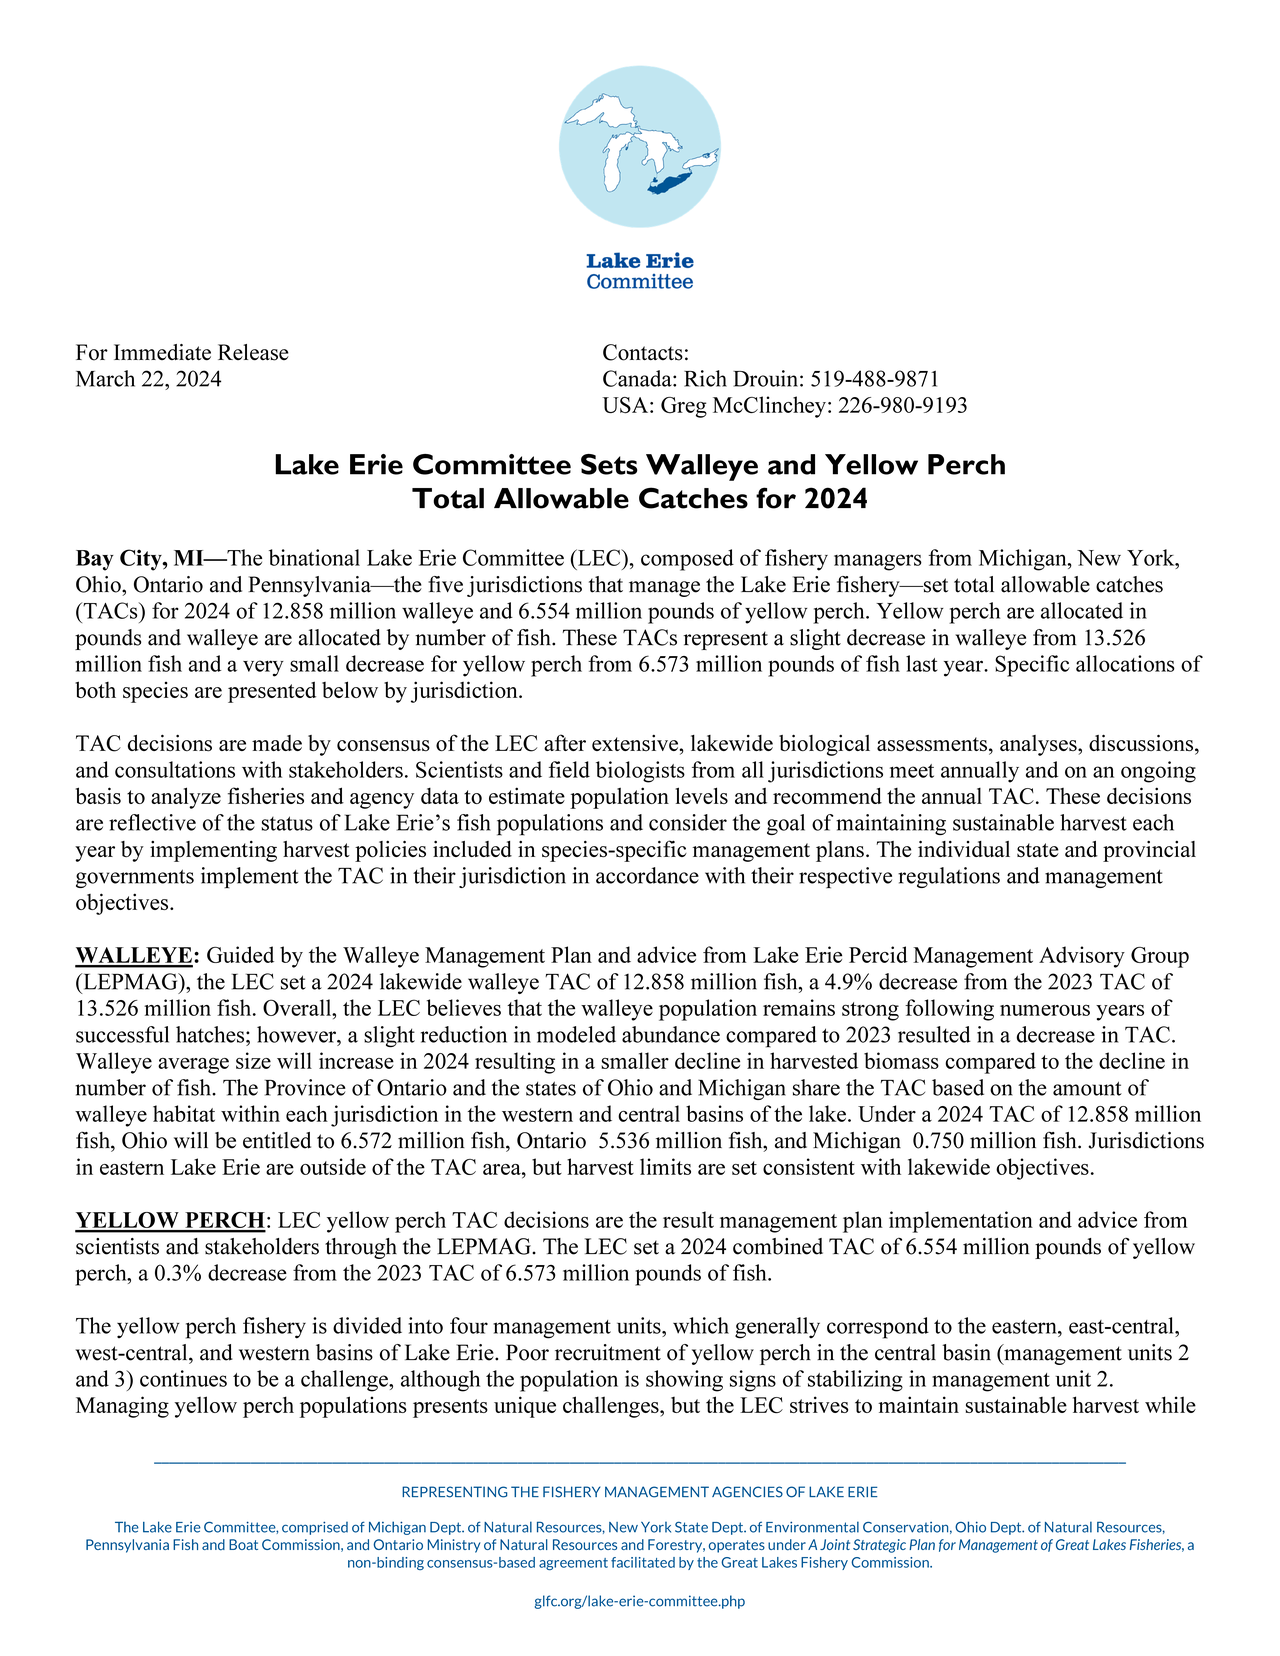 Page 1 of 2 page press release on the Lake Erie Committee letterhead; white Great Lakes emblem outlined in dark blue surrounded by light blue circle with Lake Erie filled in dark blue.